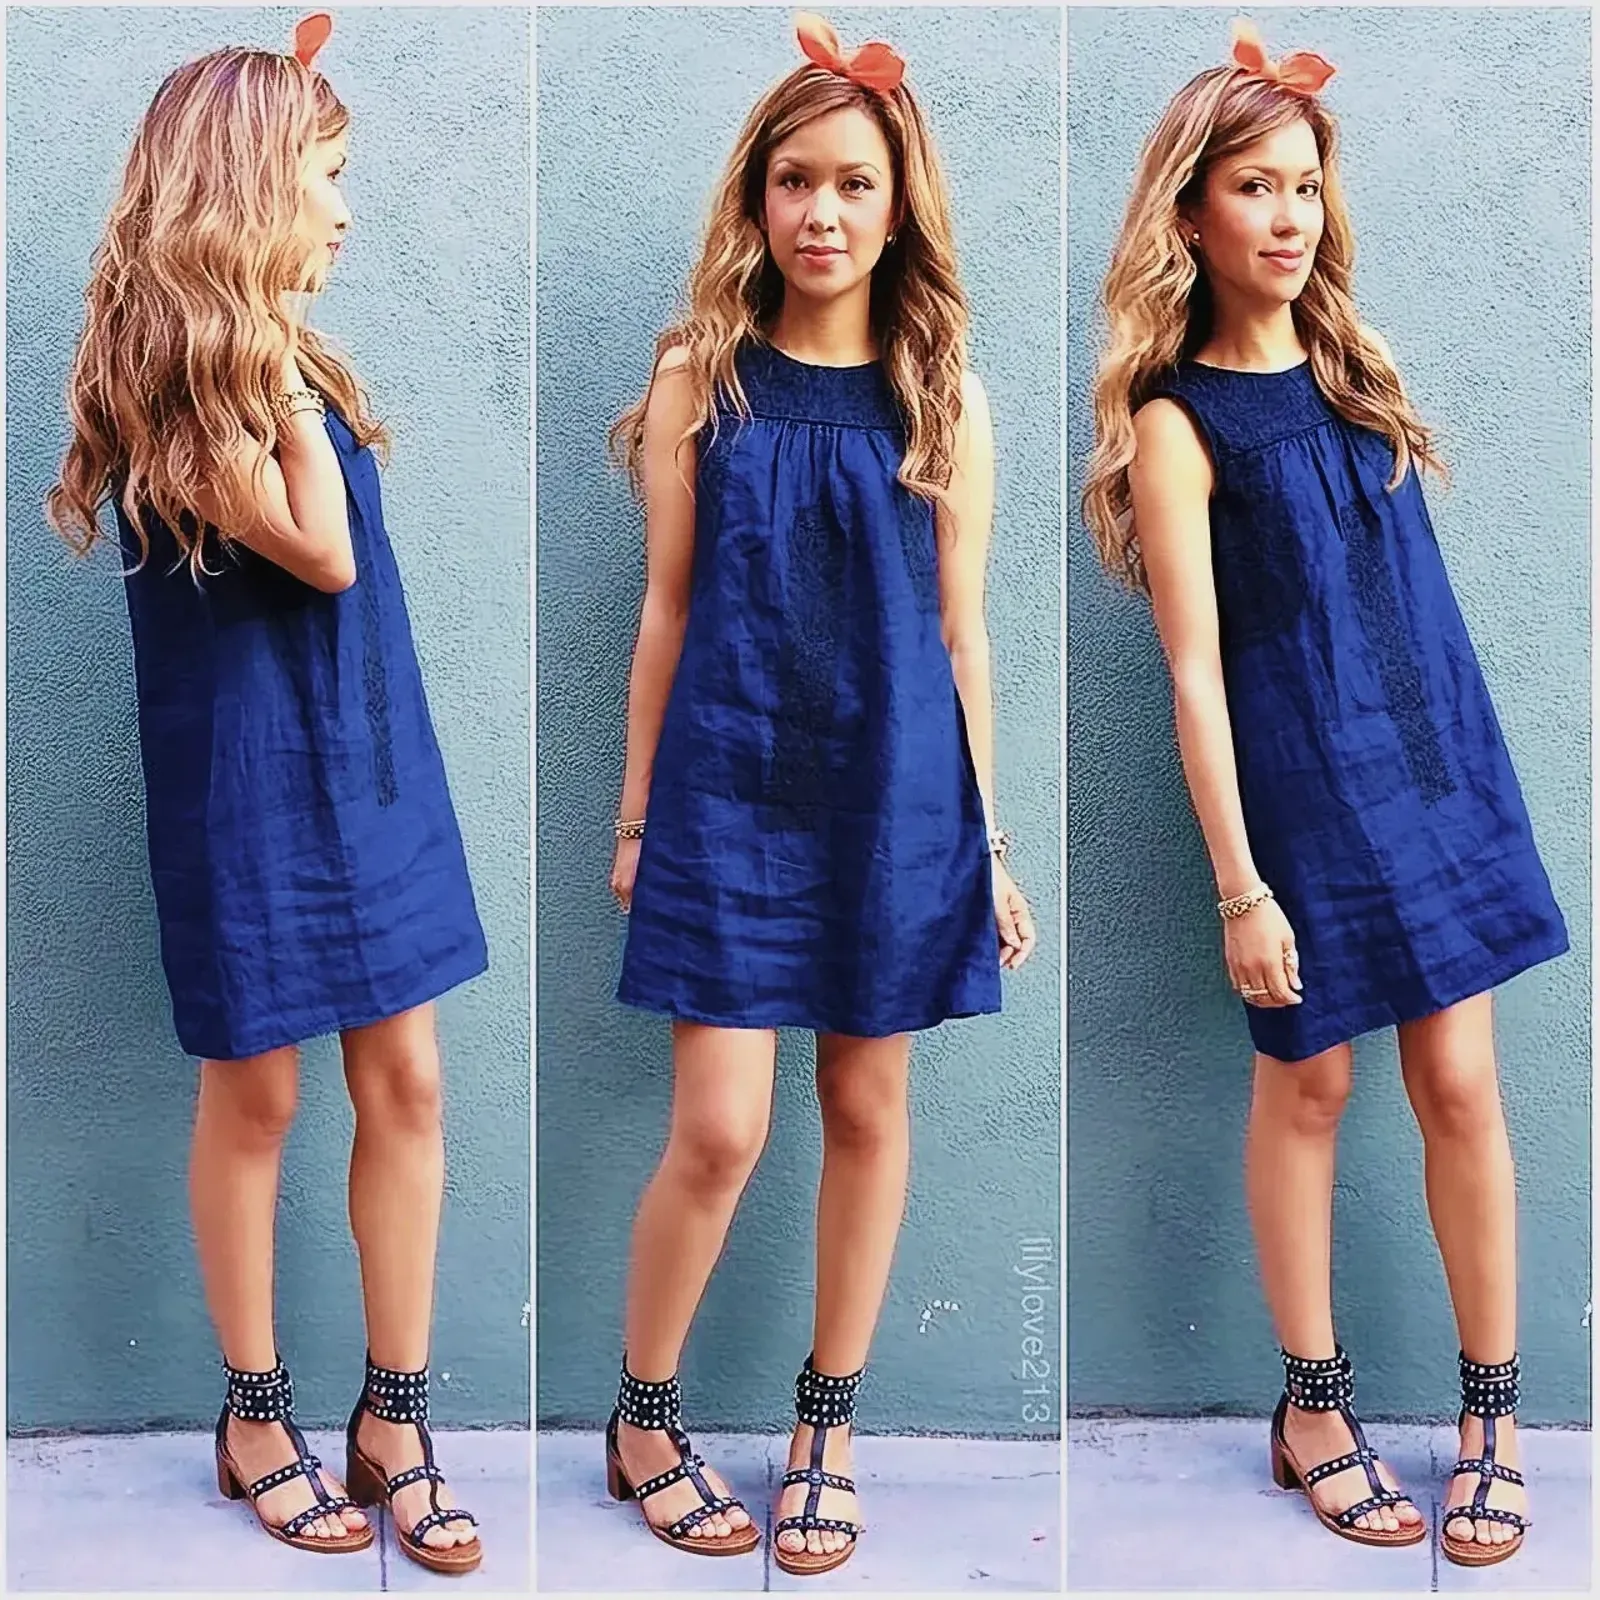 Collage of a woman in a blue day dress and matching sandals